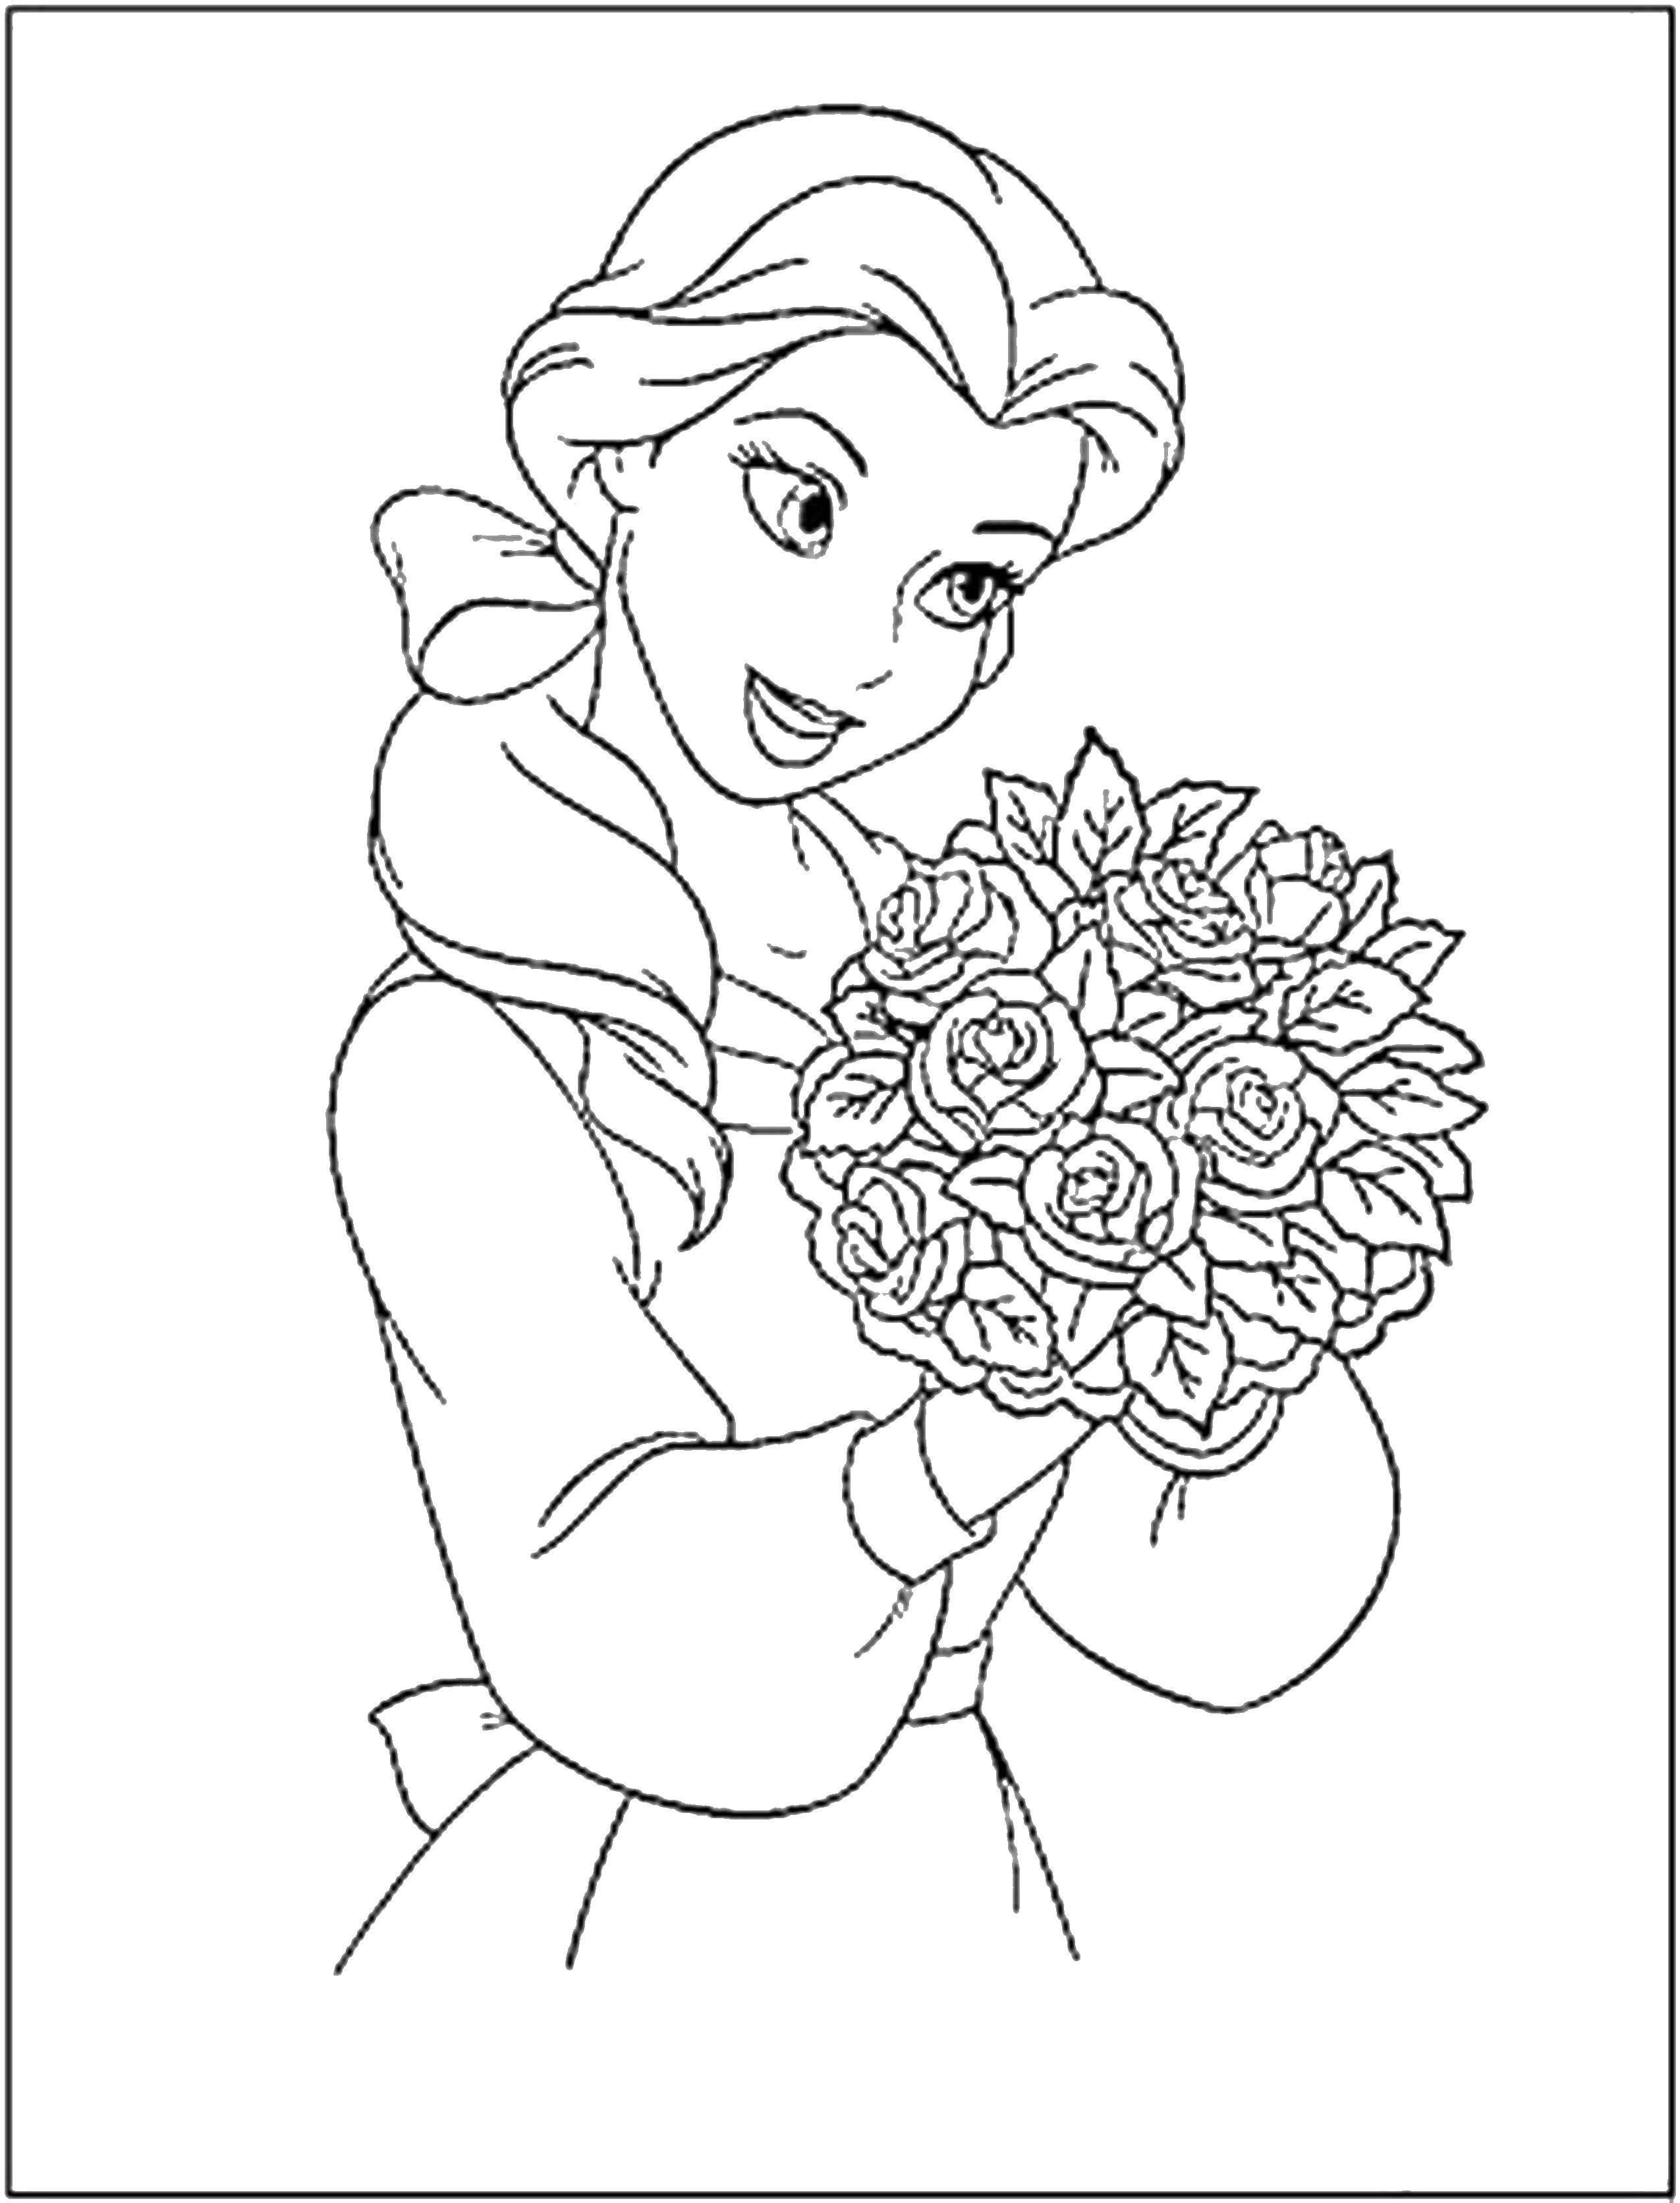 Online coloring pages coloring page a beautiful princess with a bouquet of roses princess download print coloring page